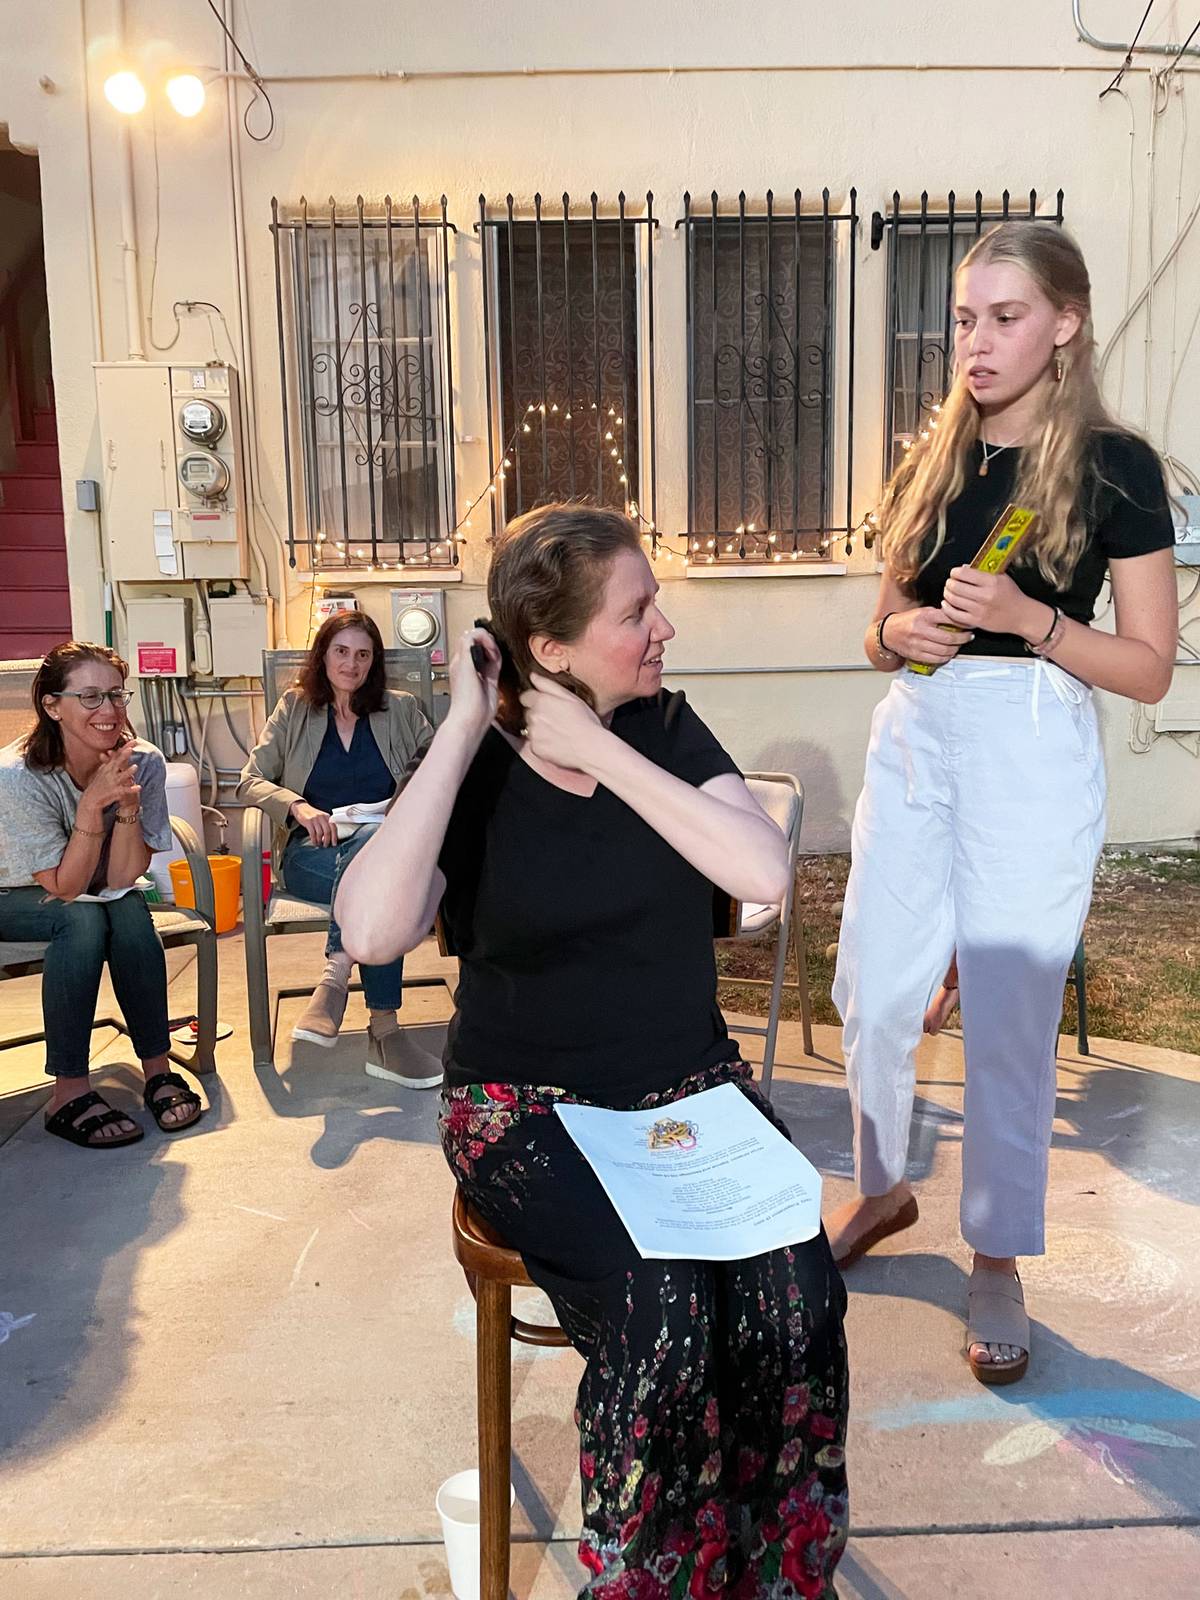 The author, seated, prepares for her daughter to cut her hair during the ceremony, as friends look on